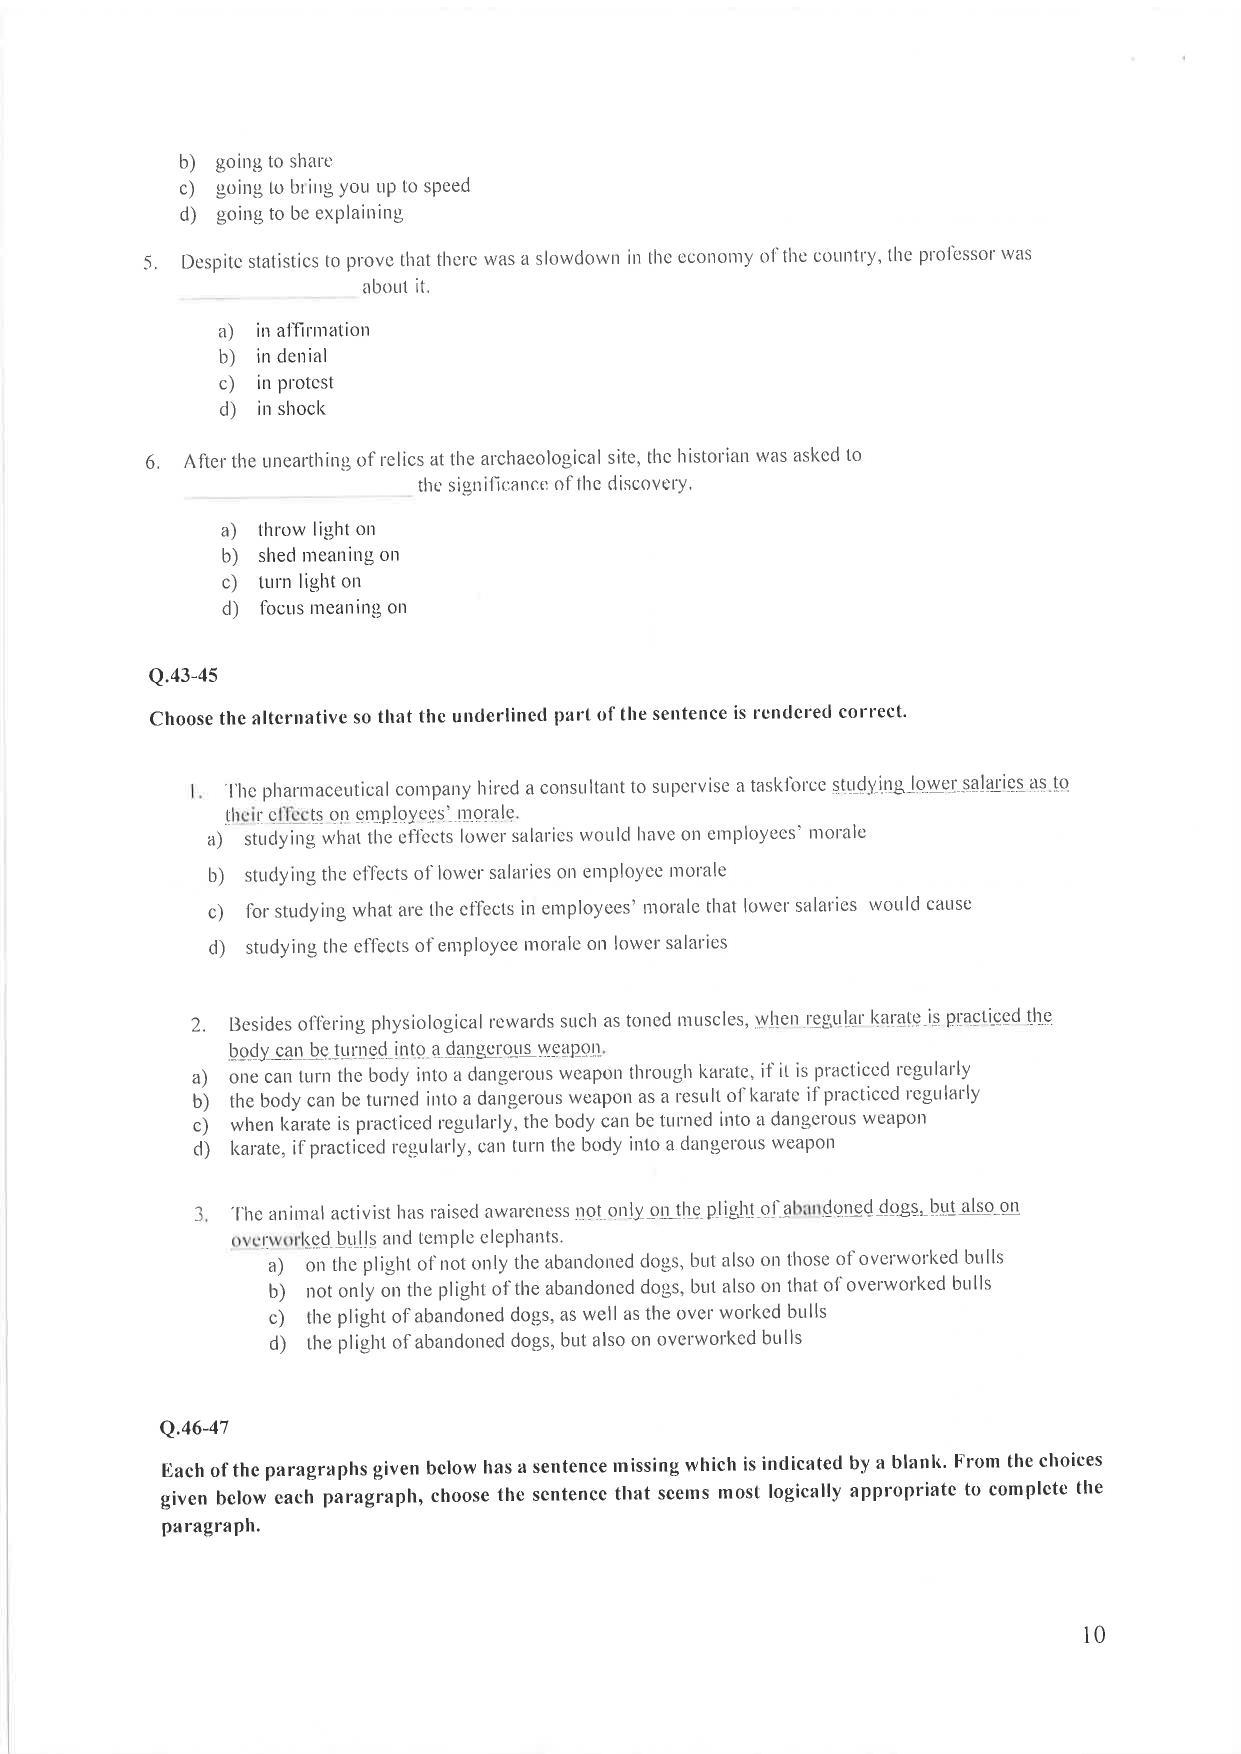 IIM Indore IPM 2020 Question Paper - Page 10